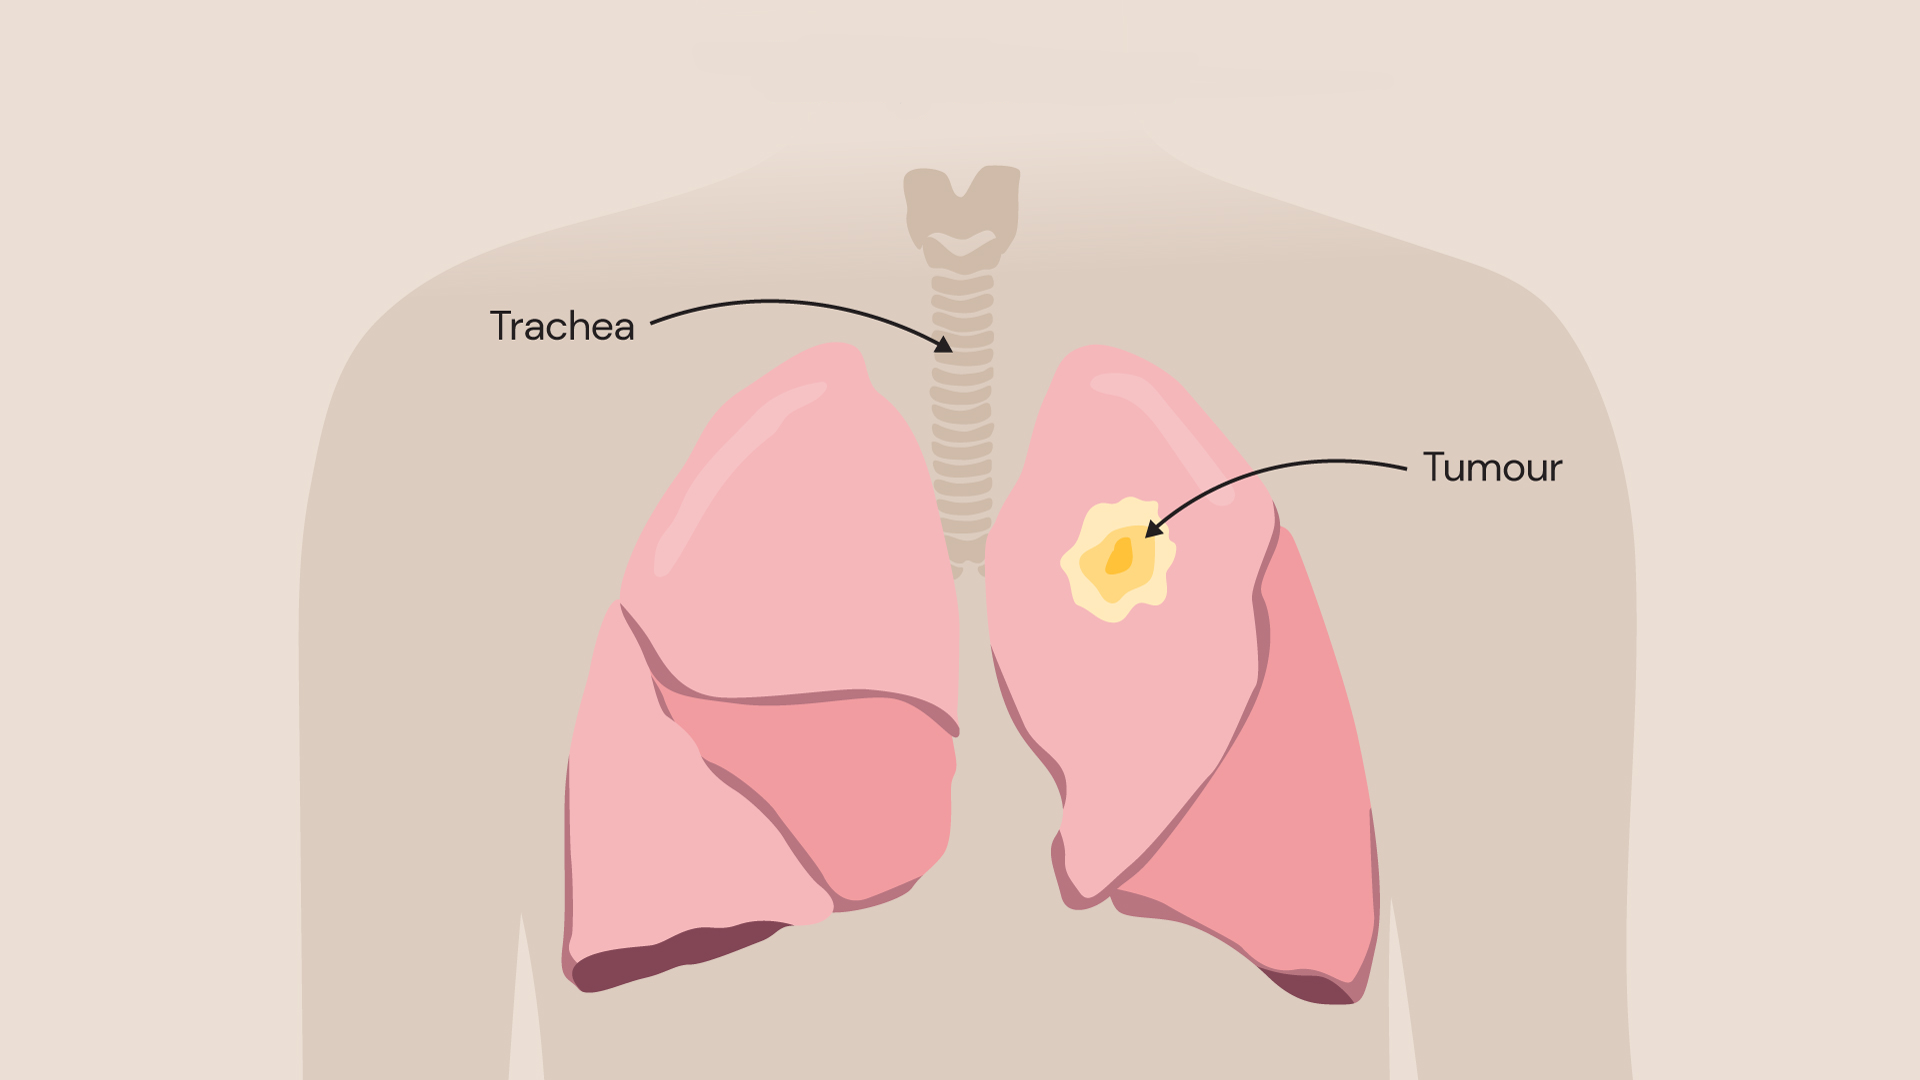 An illustration showing lung cancer